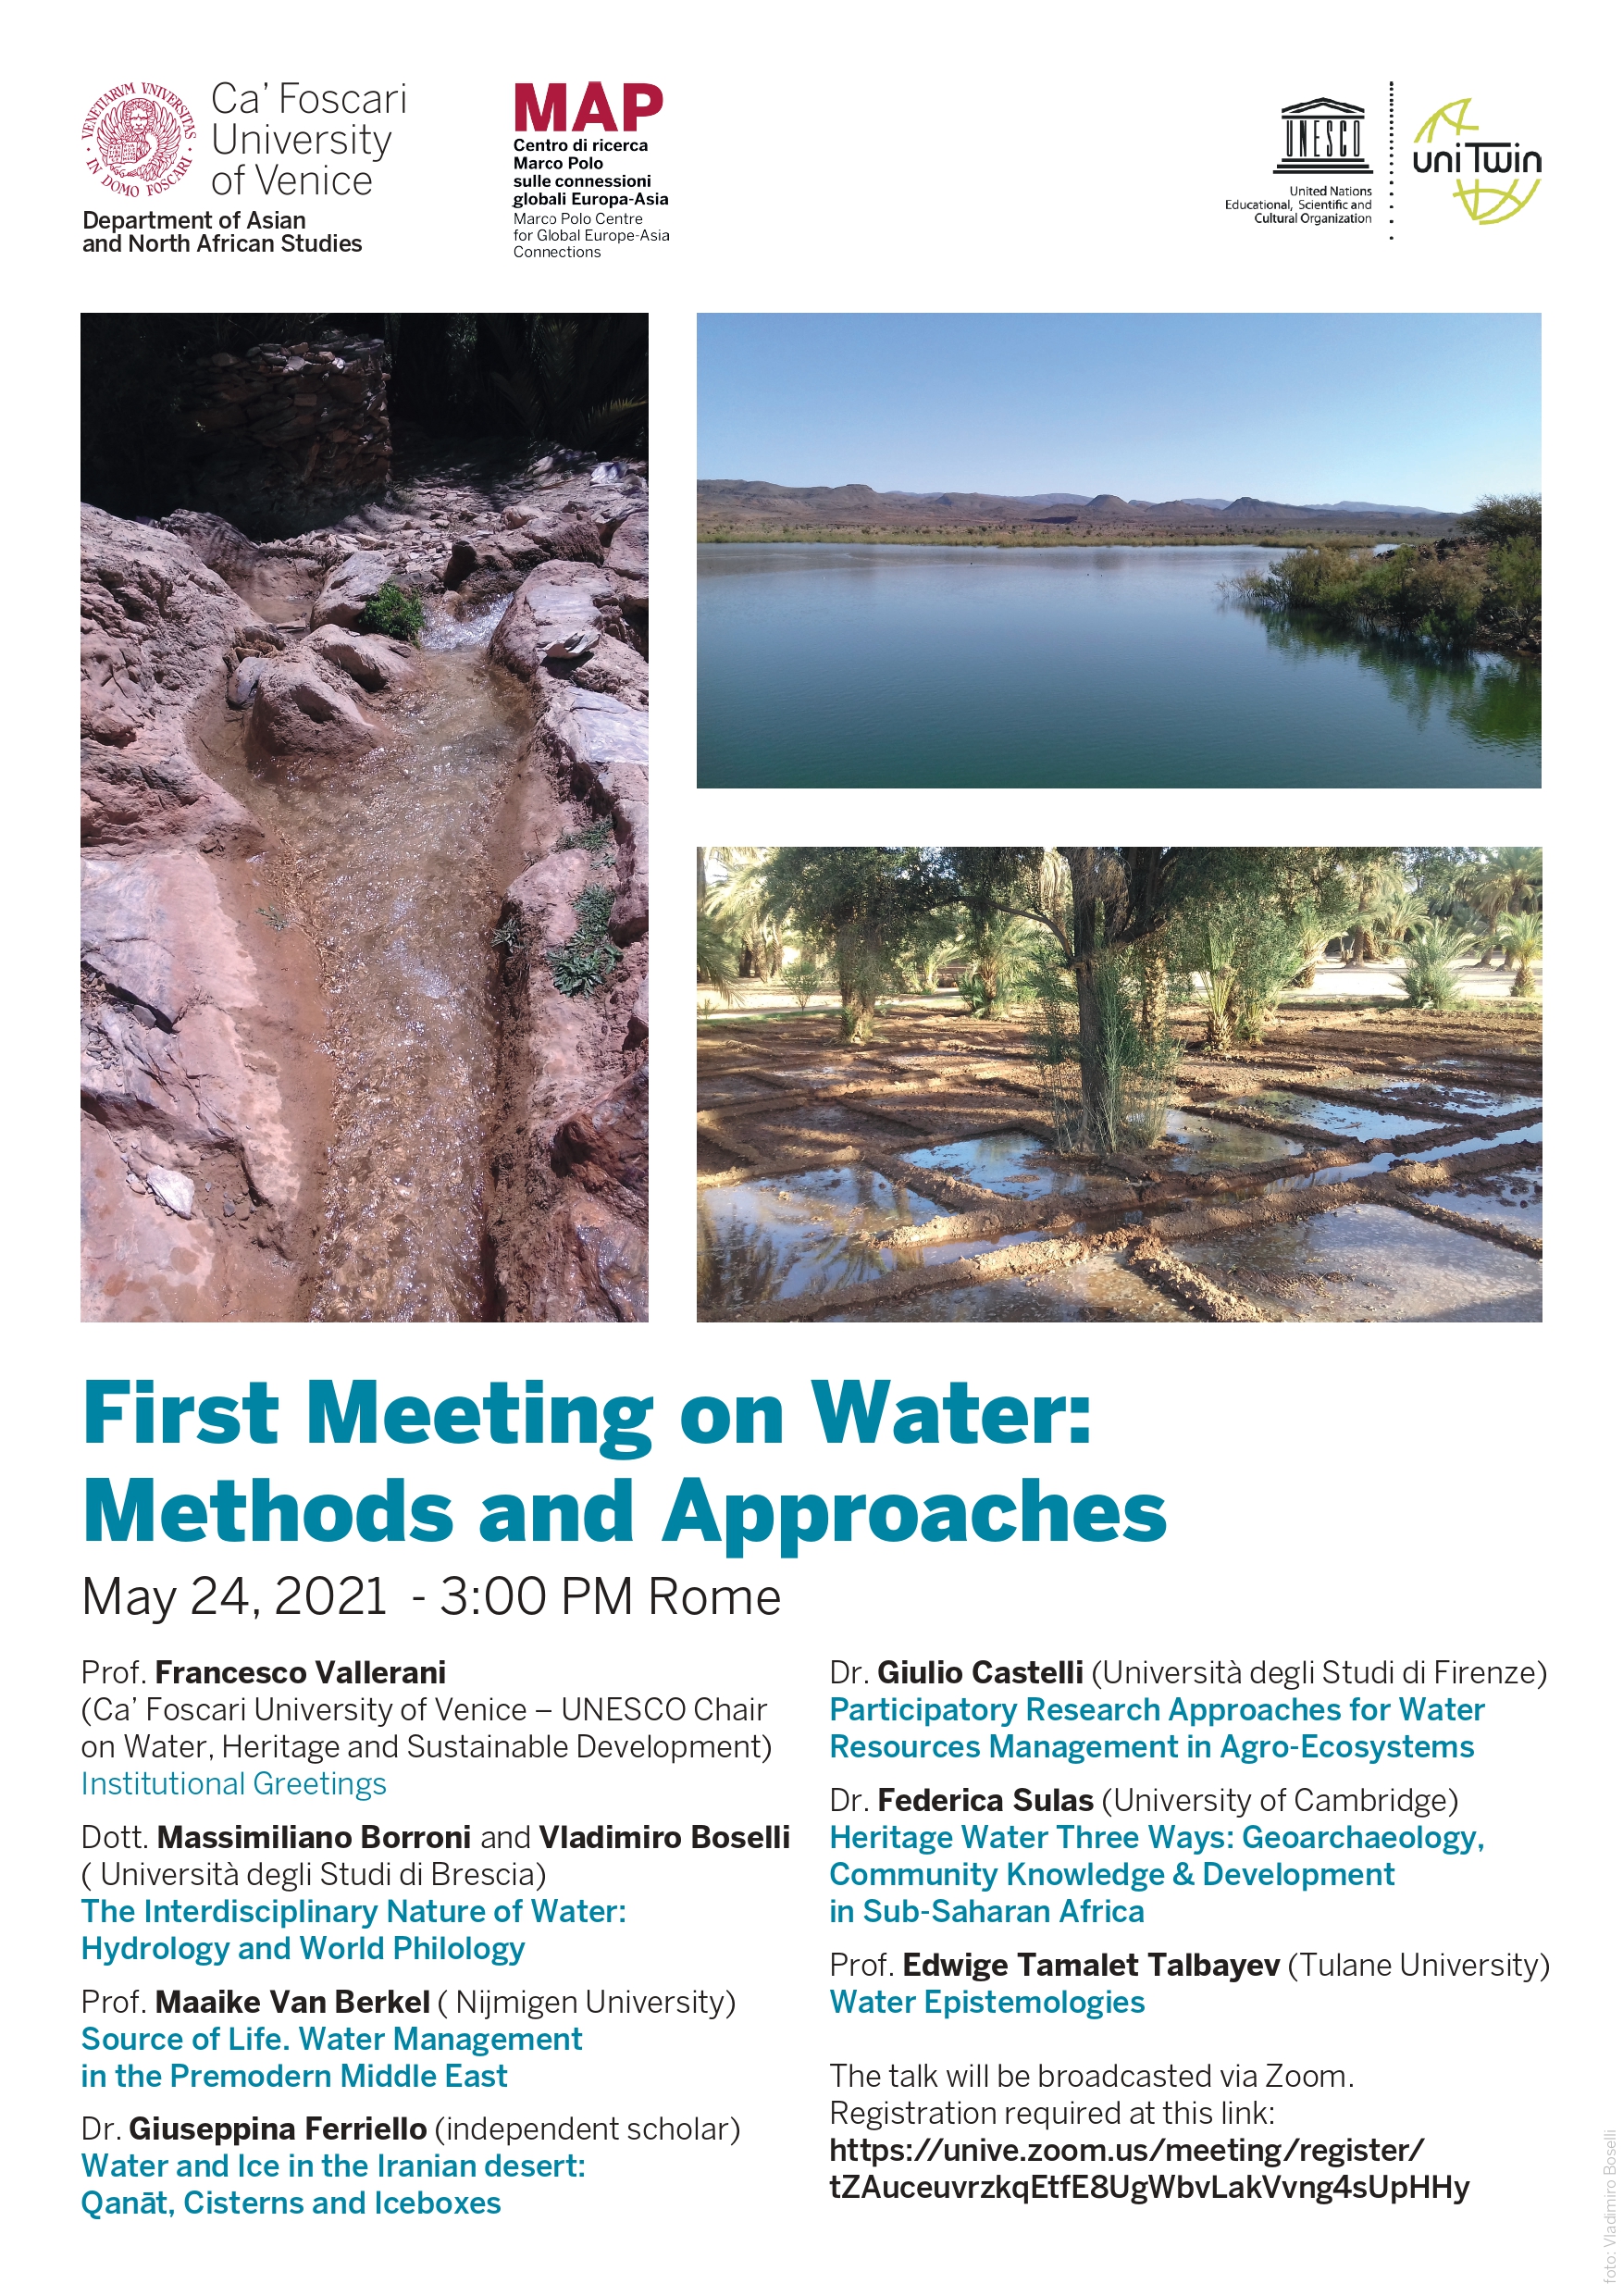 First meeting on water: Methods and approaches